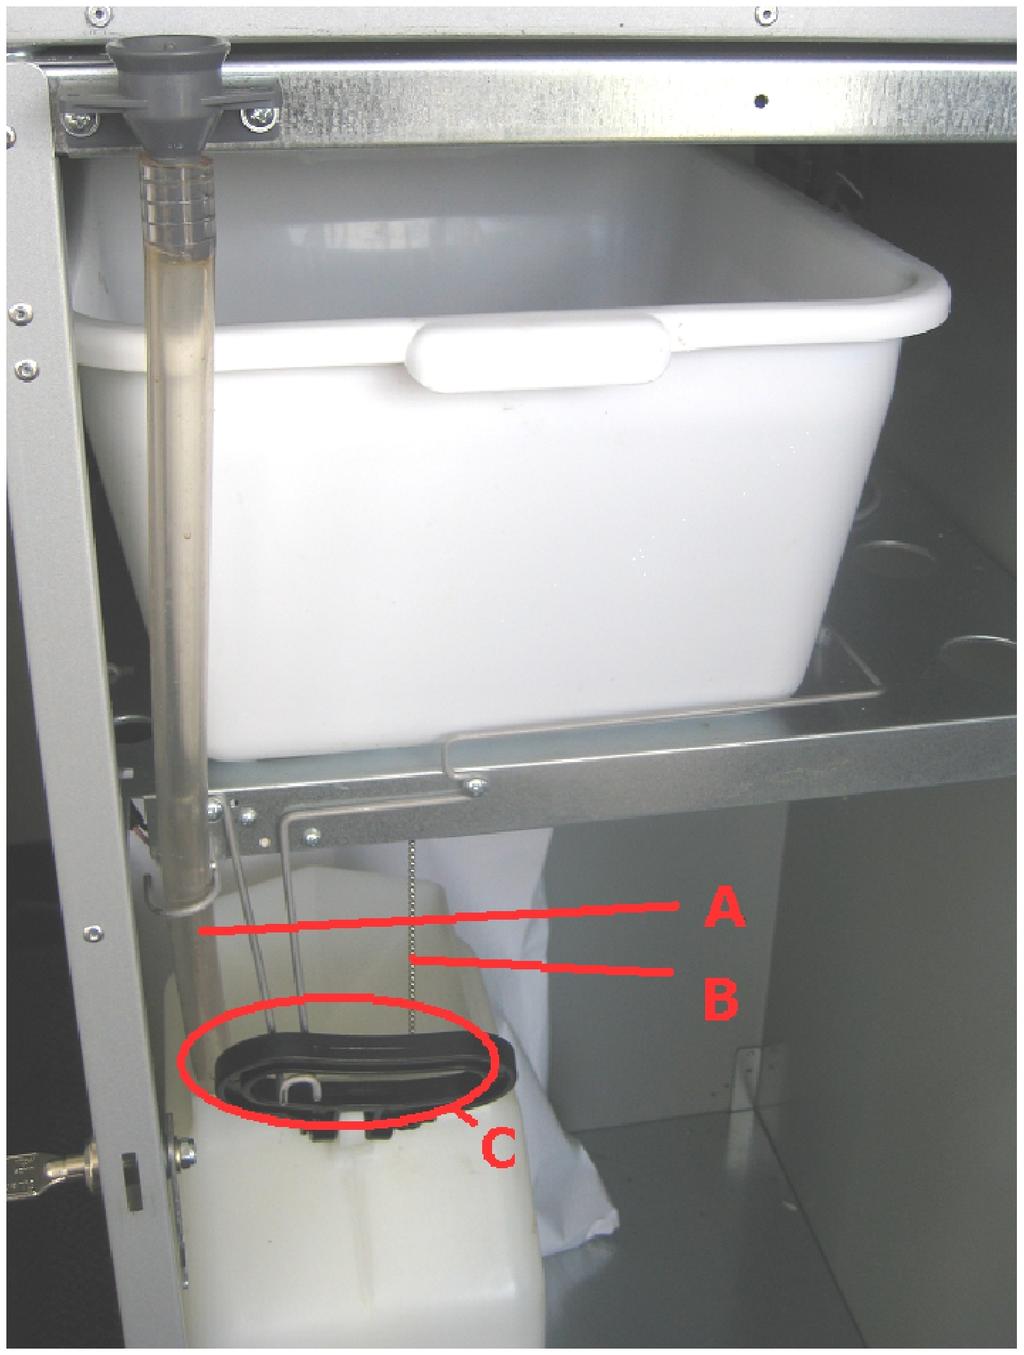 11. Open the lower metal base cabinet door with the round key, ensure the clear plastic drip tray hose (A) and waste container float/chain (B) are placed within the white waste water container (C) 12.